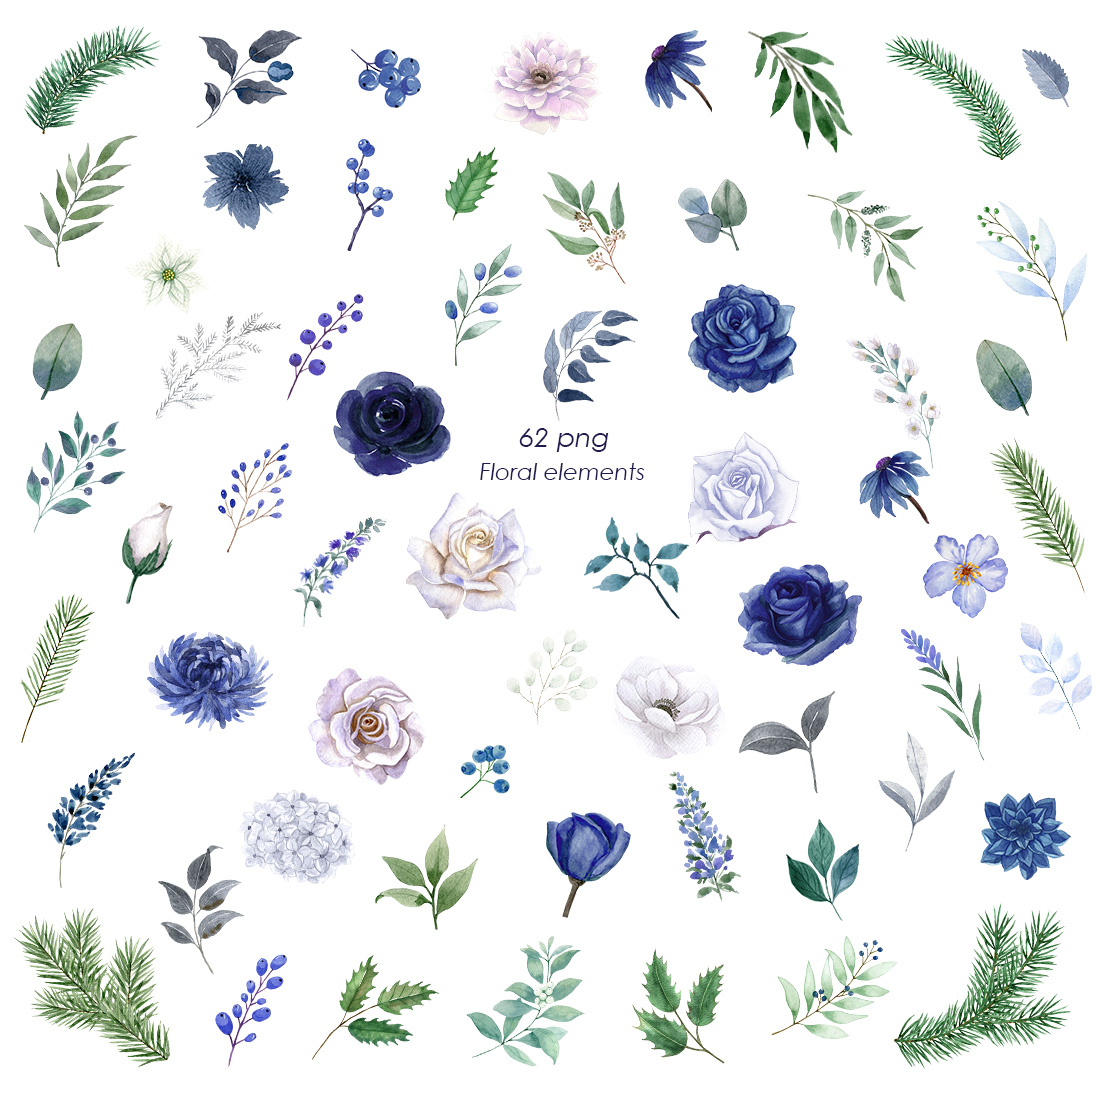 Set of Winter Fantasy Watercolor Floral Bouquet Clipart cover image.